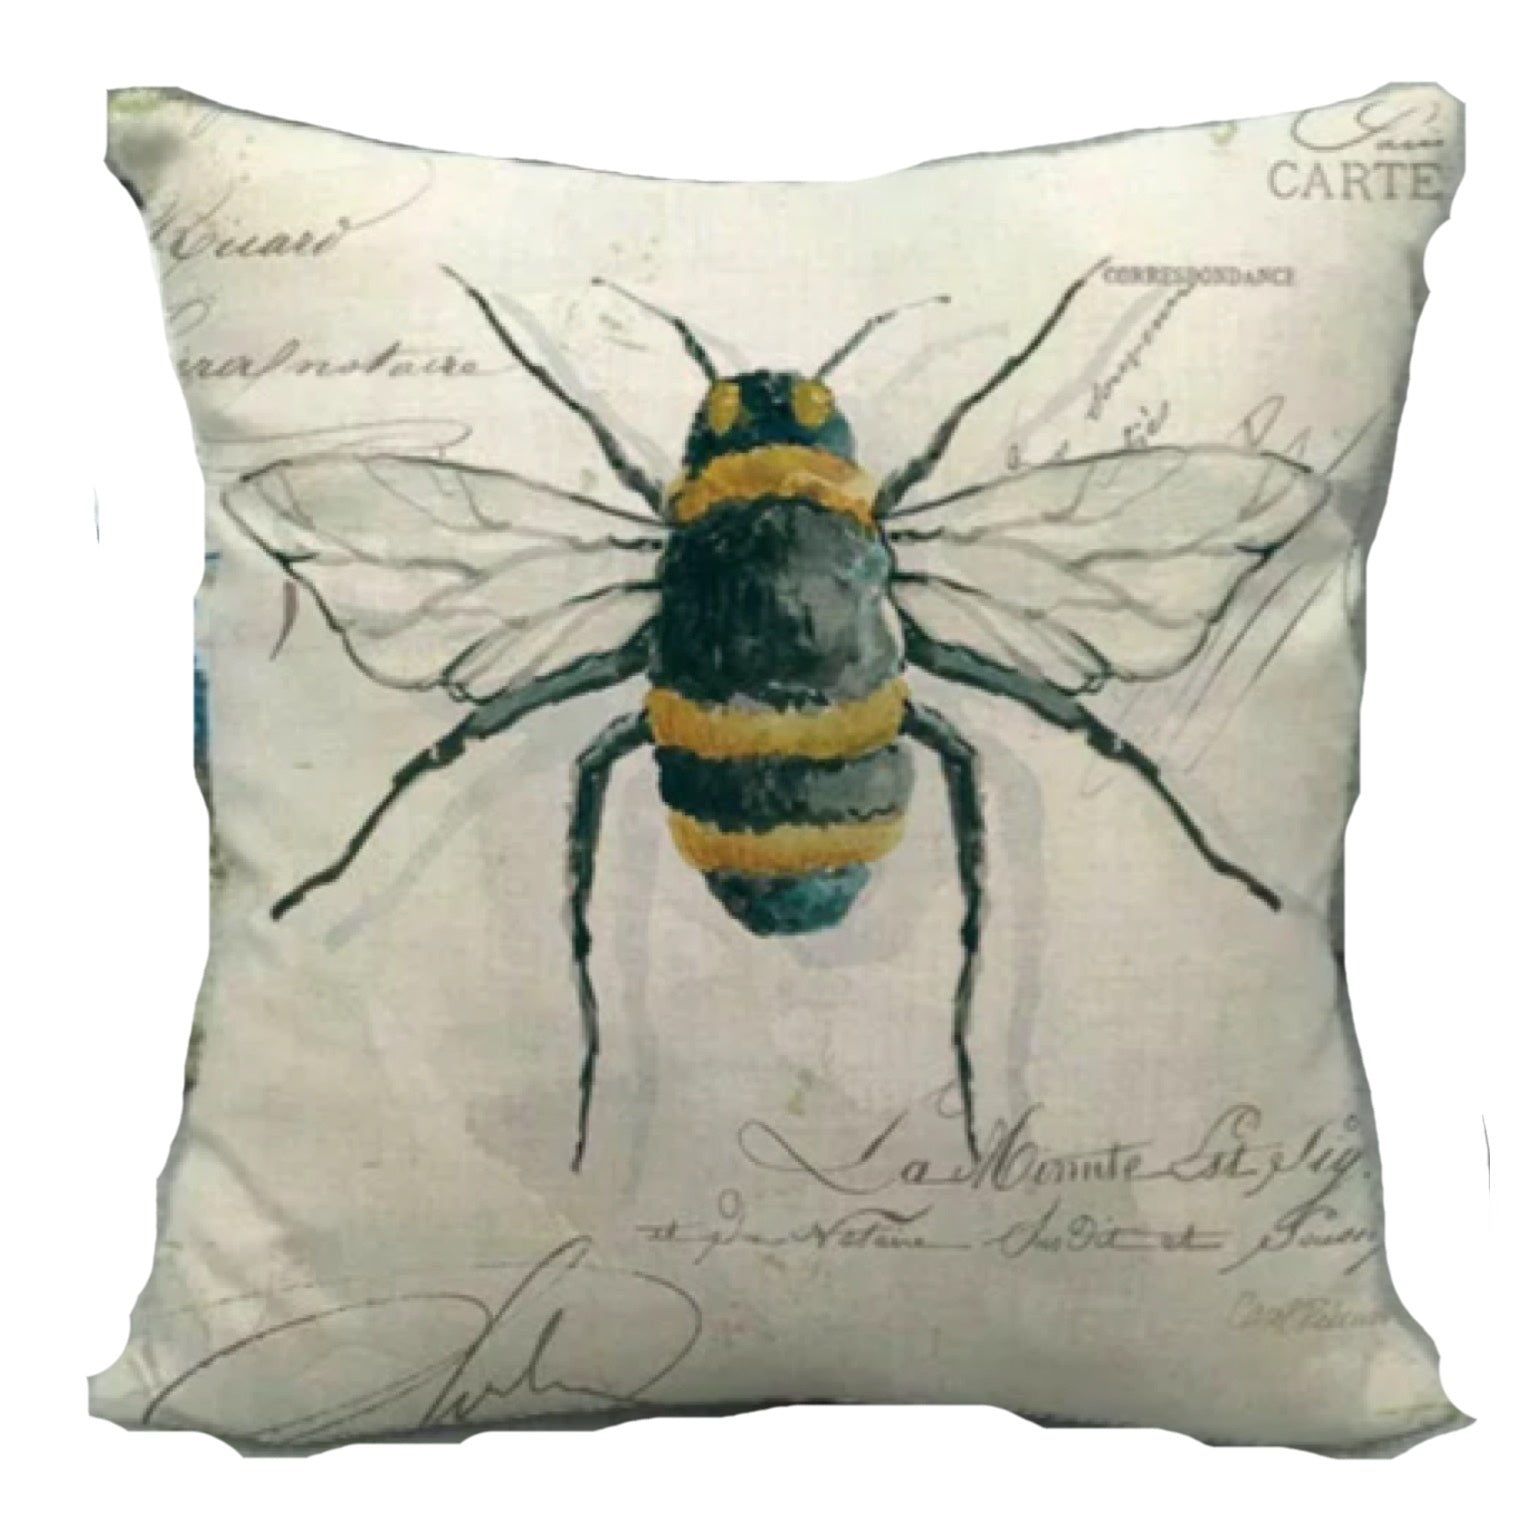 Cushion Cover Bee Bumble Hives - The Renmy Store Homewares & Gifts 